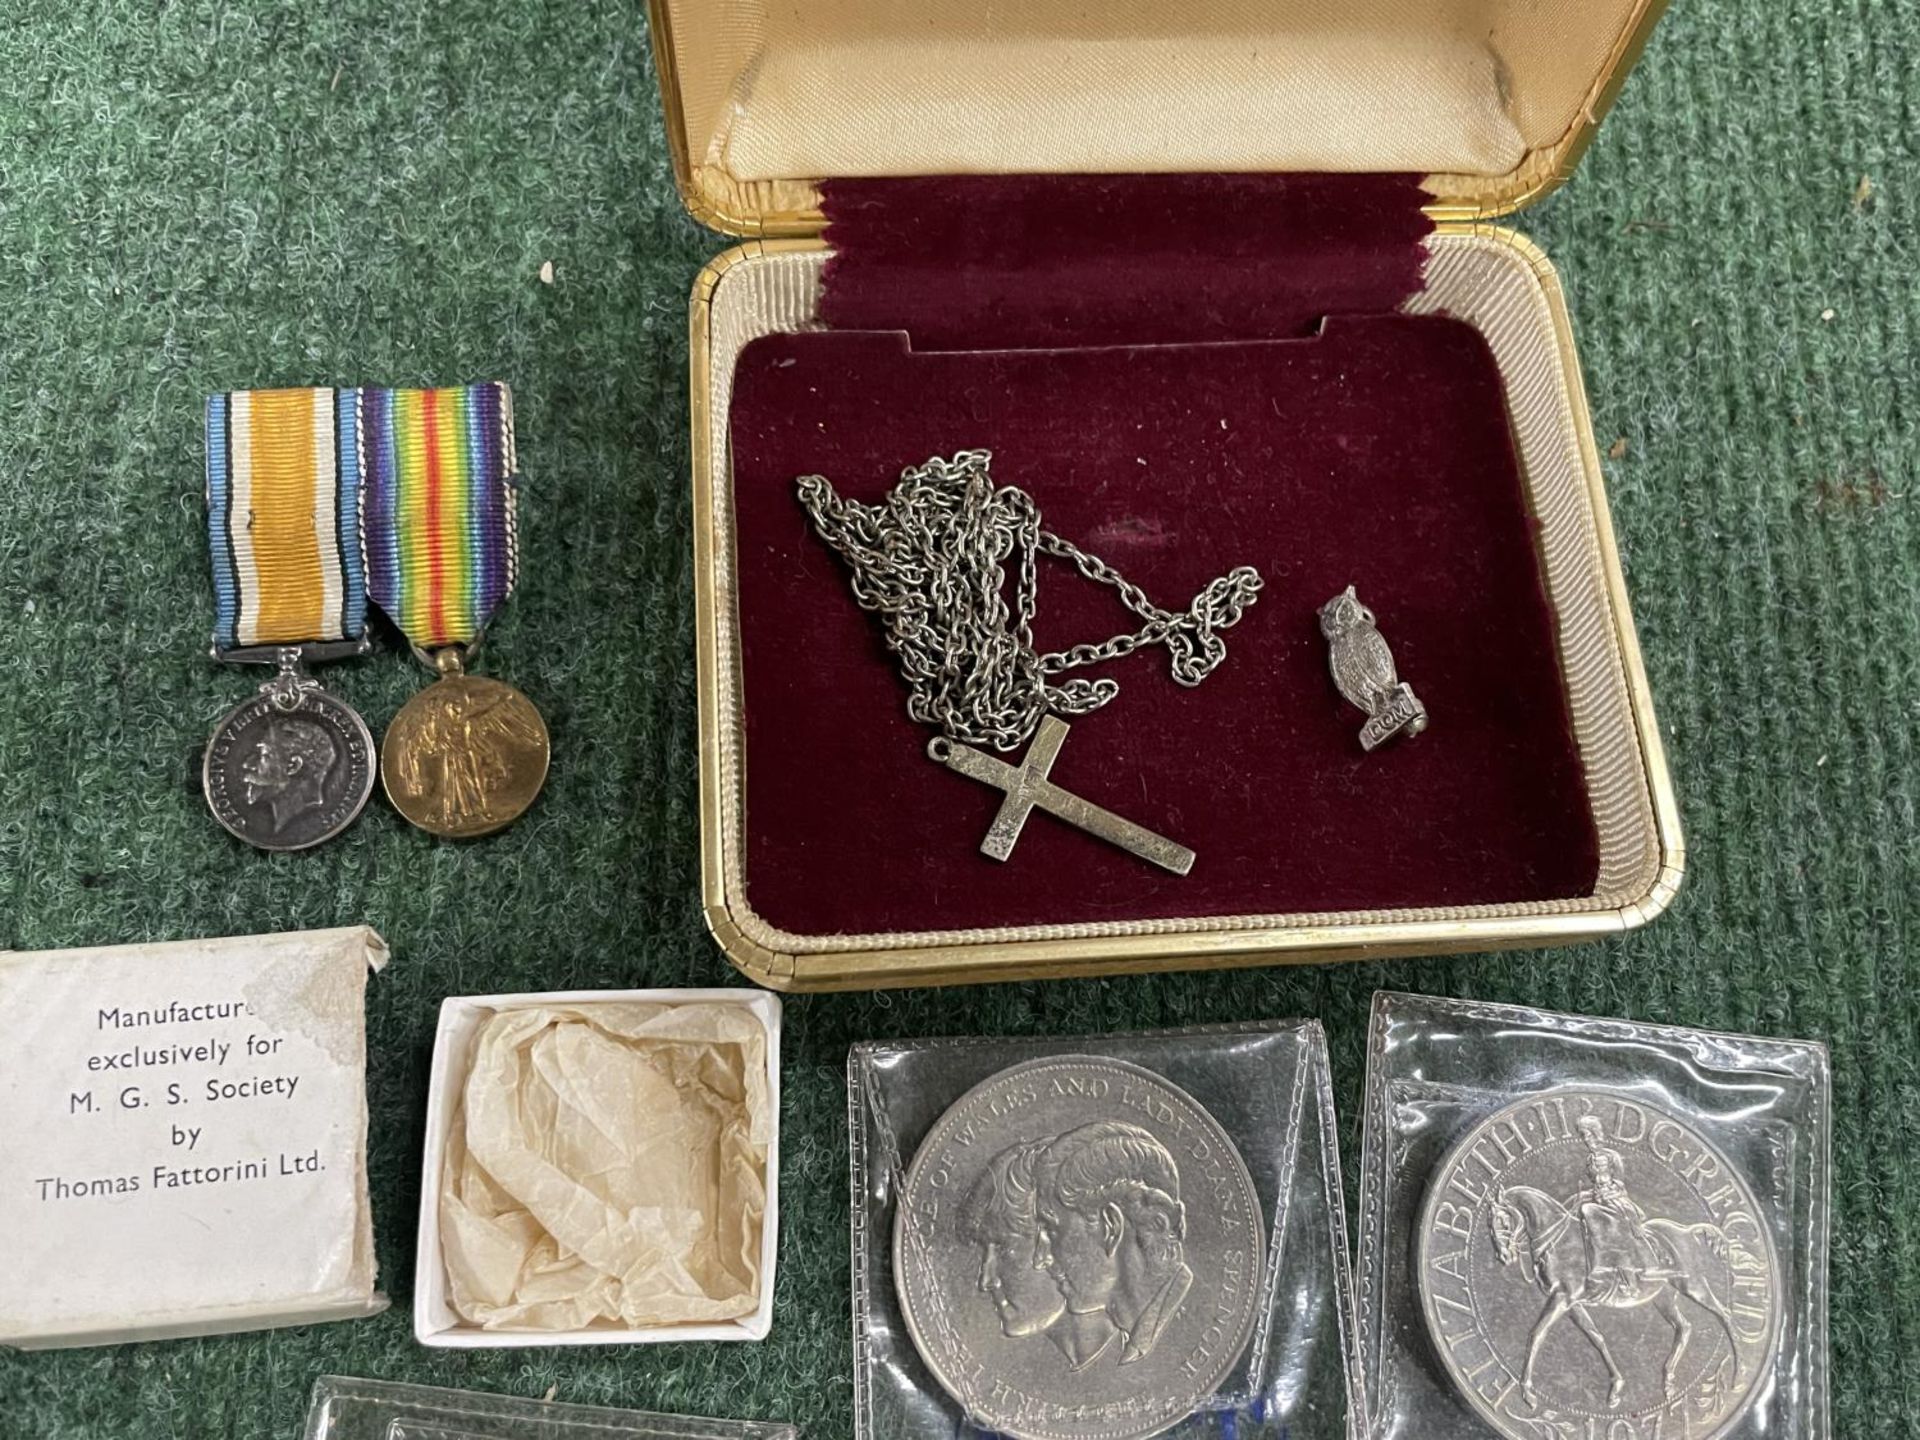 FIVE COMMEMORATIVE COINS, A SILVER CHAIN, TWO CRUCIFIXES AND A WW1 MINIATURE DRESS MEDAL - Image 2 of 3